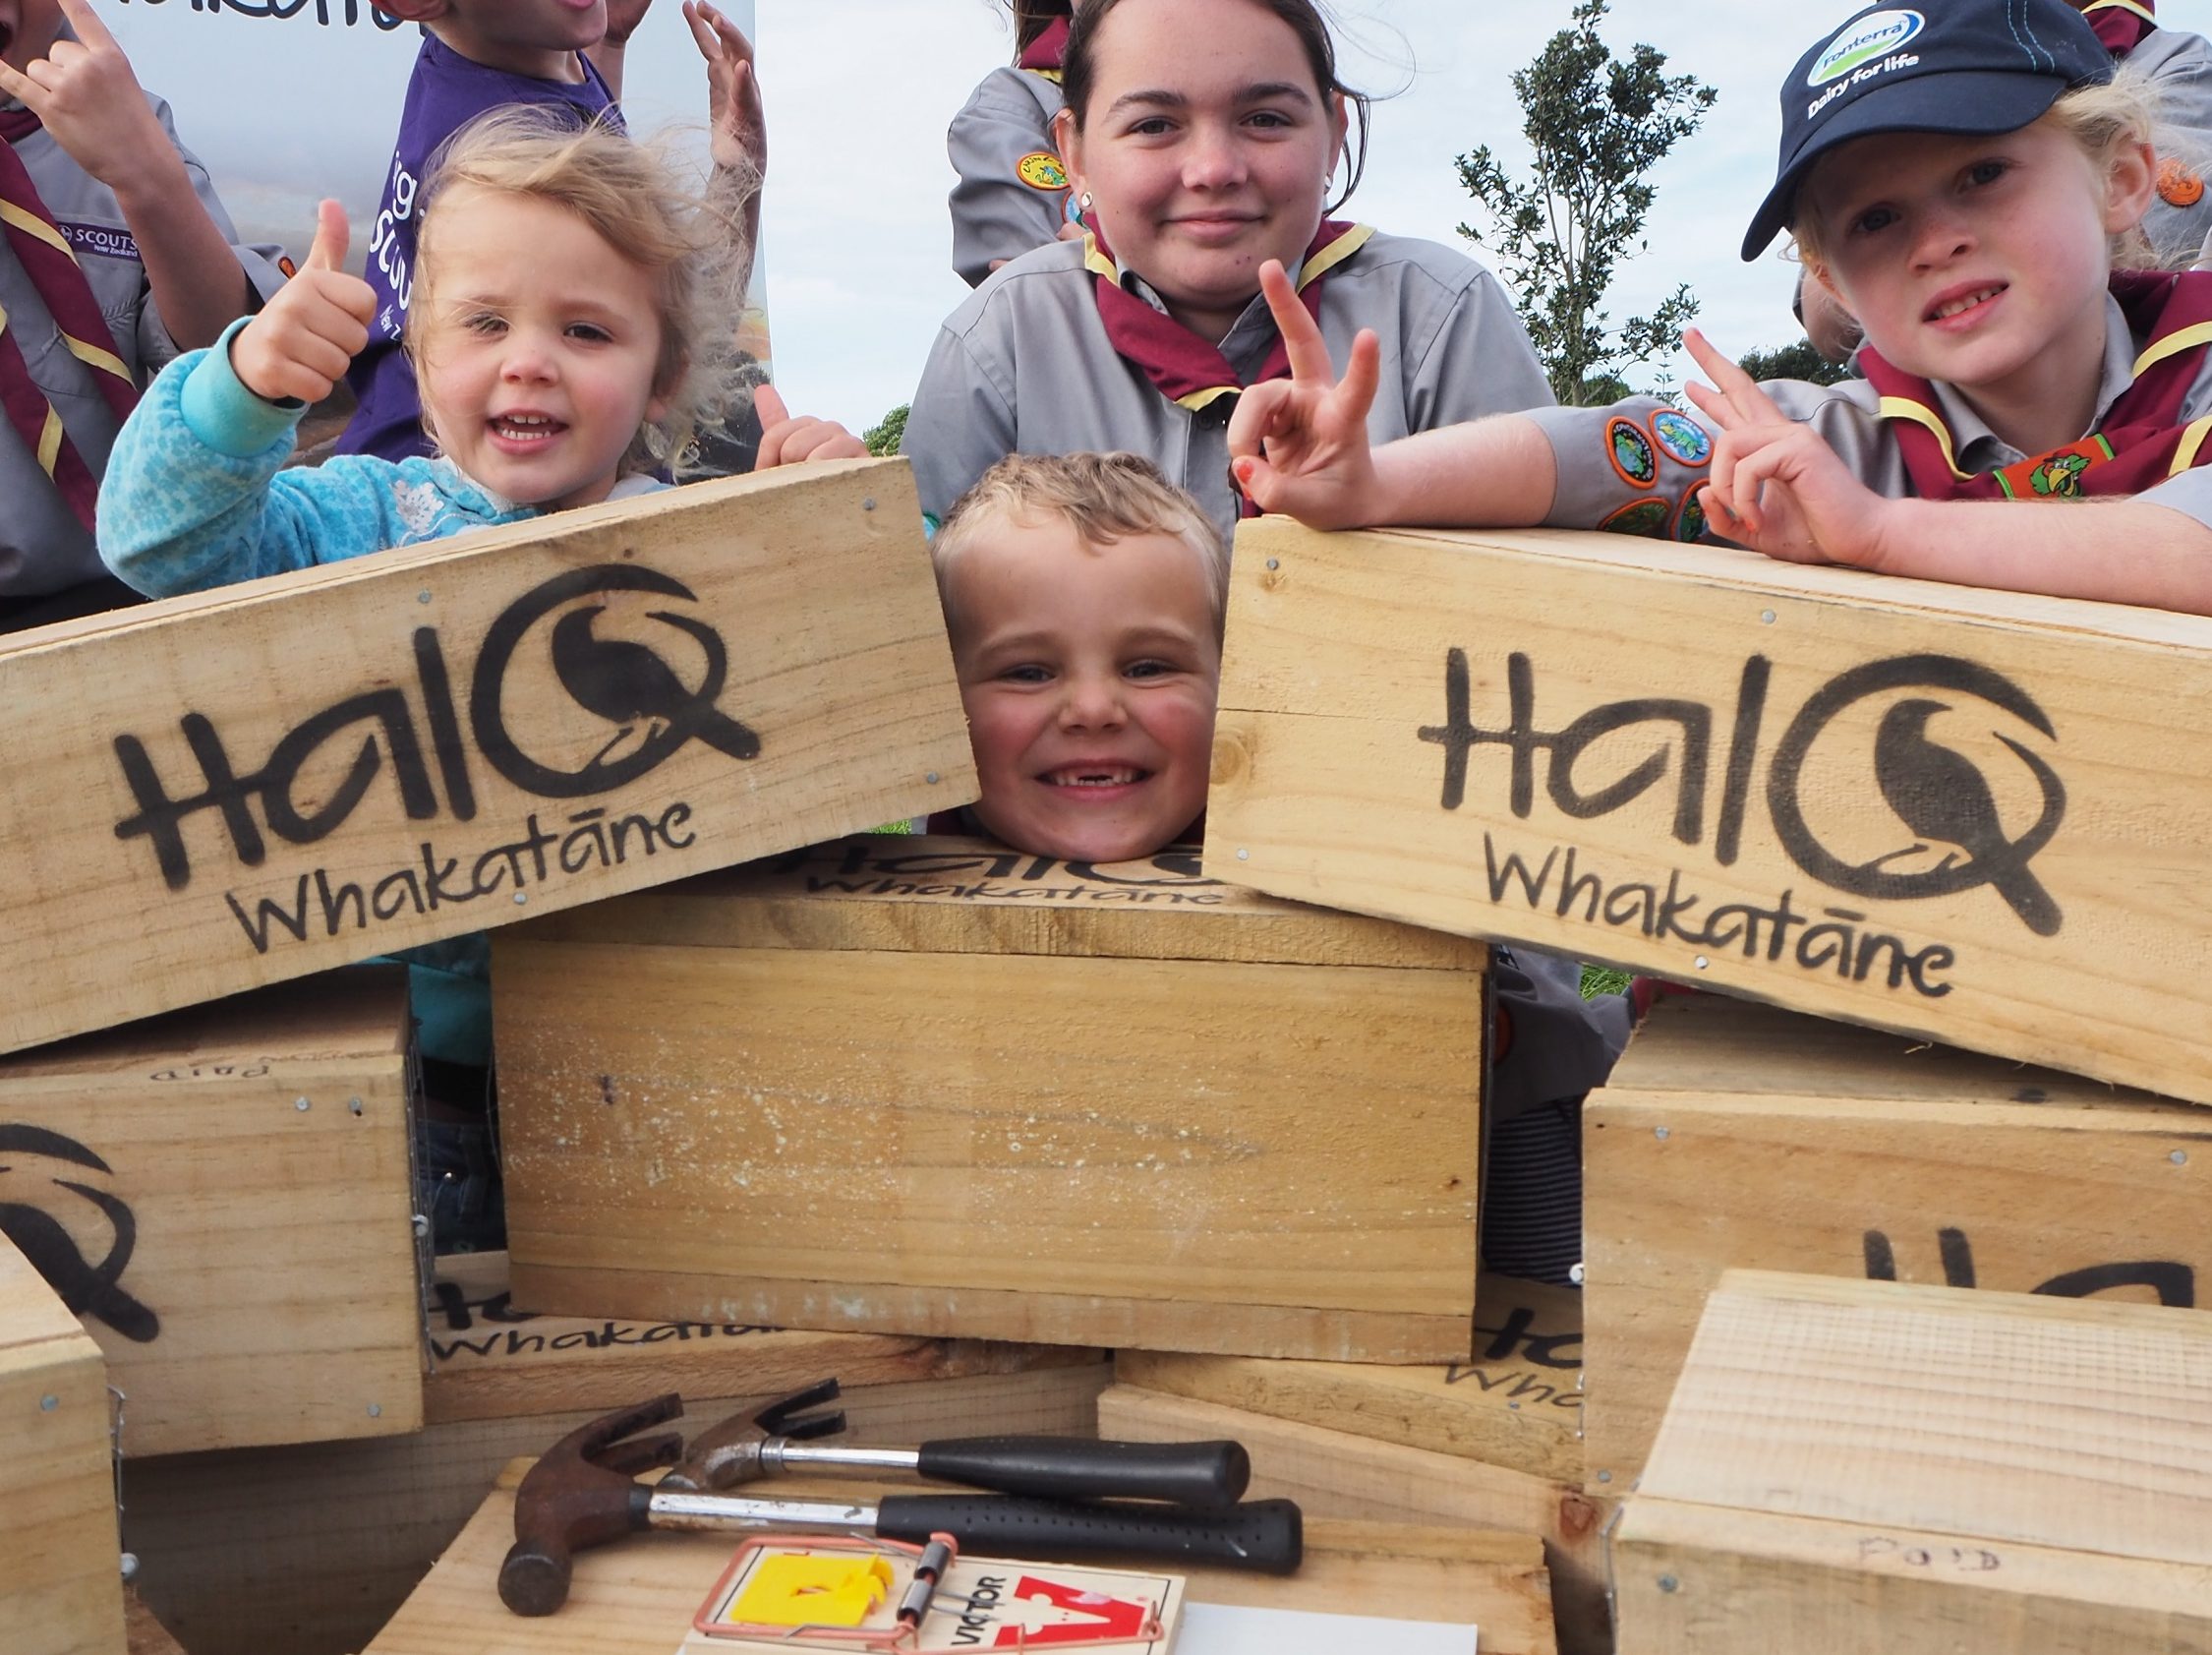 A group of kids with trap boxes doing peace signs